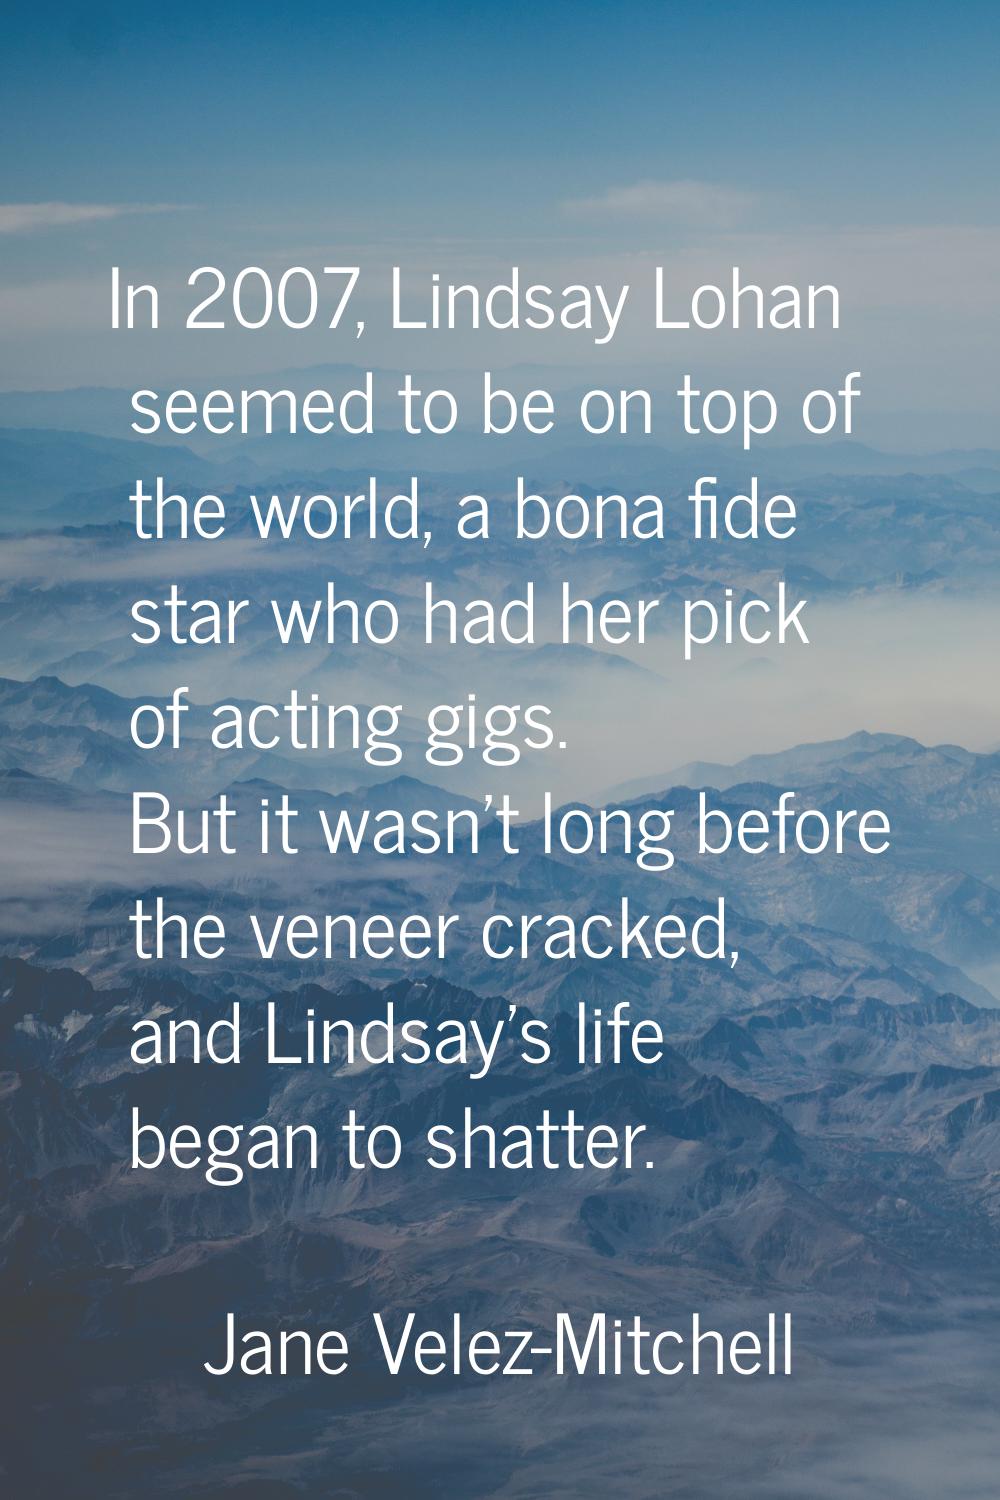 In 2007, Lindsay Lohan seemed to be on top of the world, a bona fide star who had her pick of actin